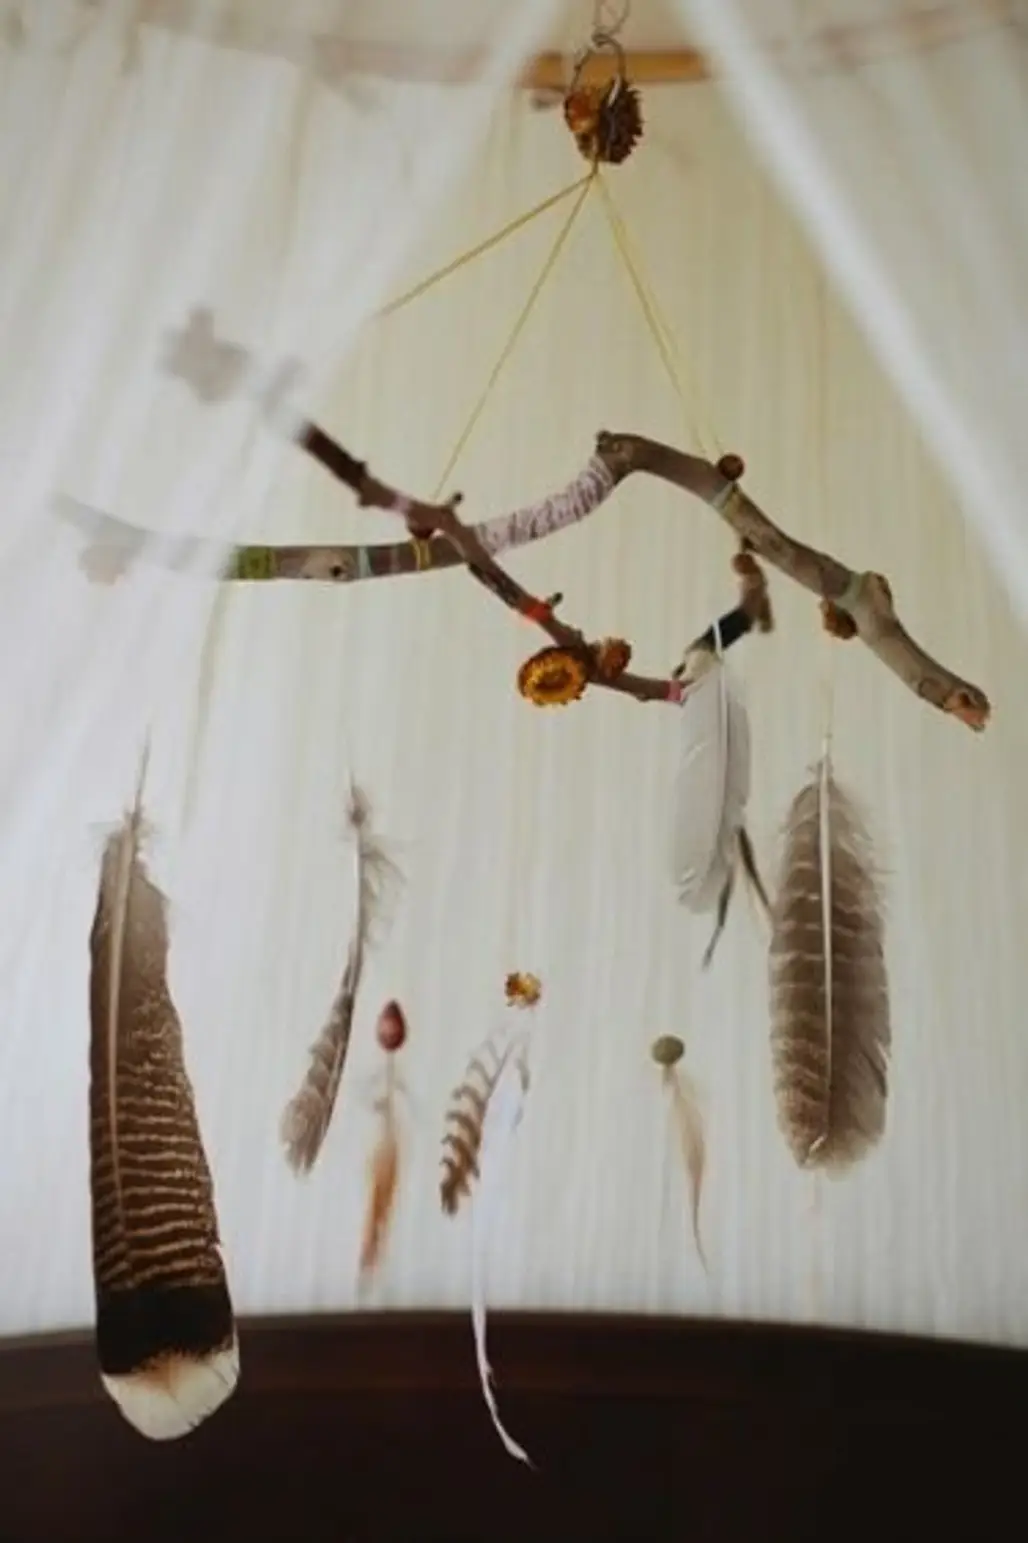 Go a Bit Boho with a Branch and Feather Mobile